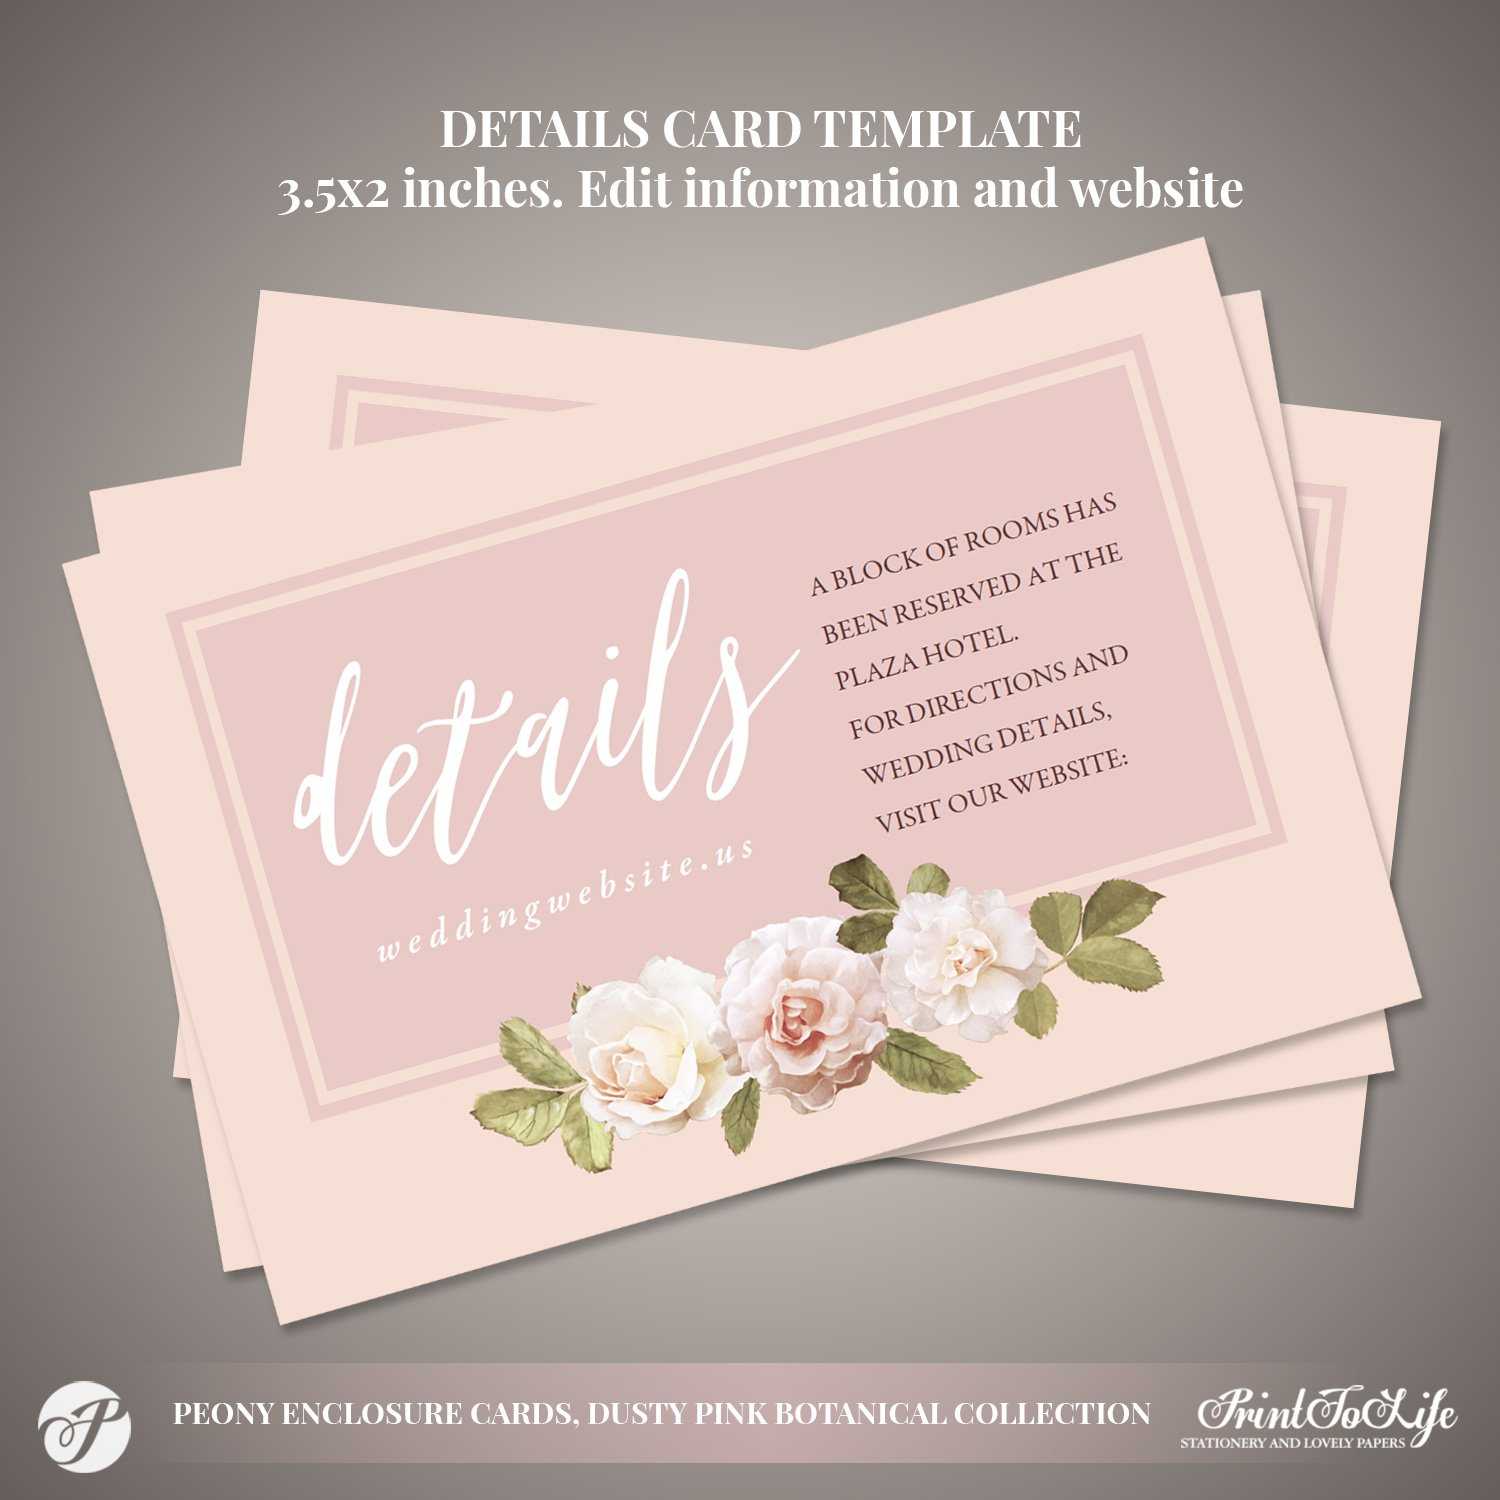 Peony Details Card, Wedding Information Card #dusty Pink Botanical  Collection Intended For Marriage Advice Cards Templates